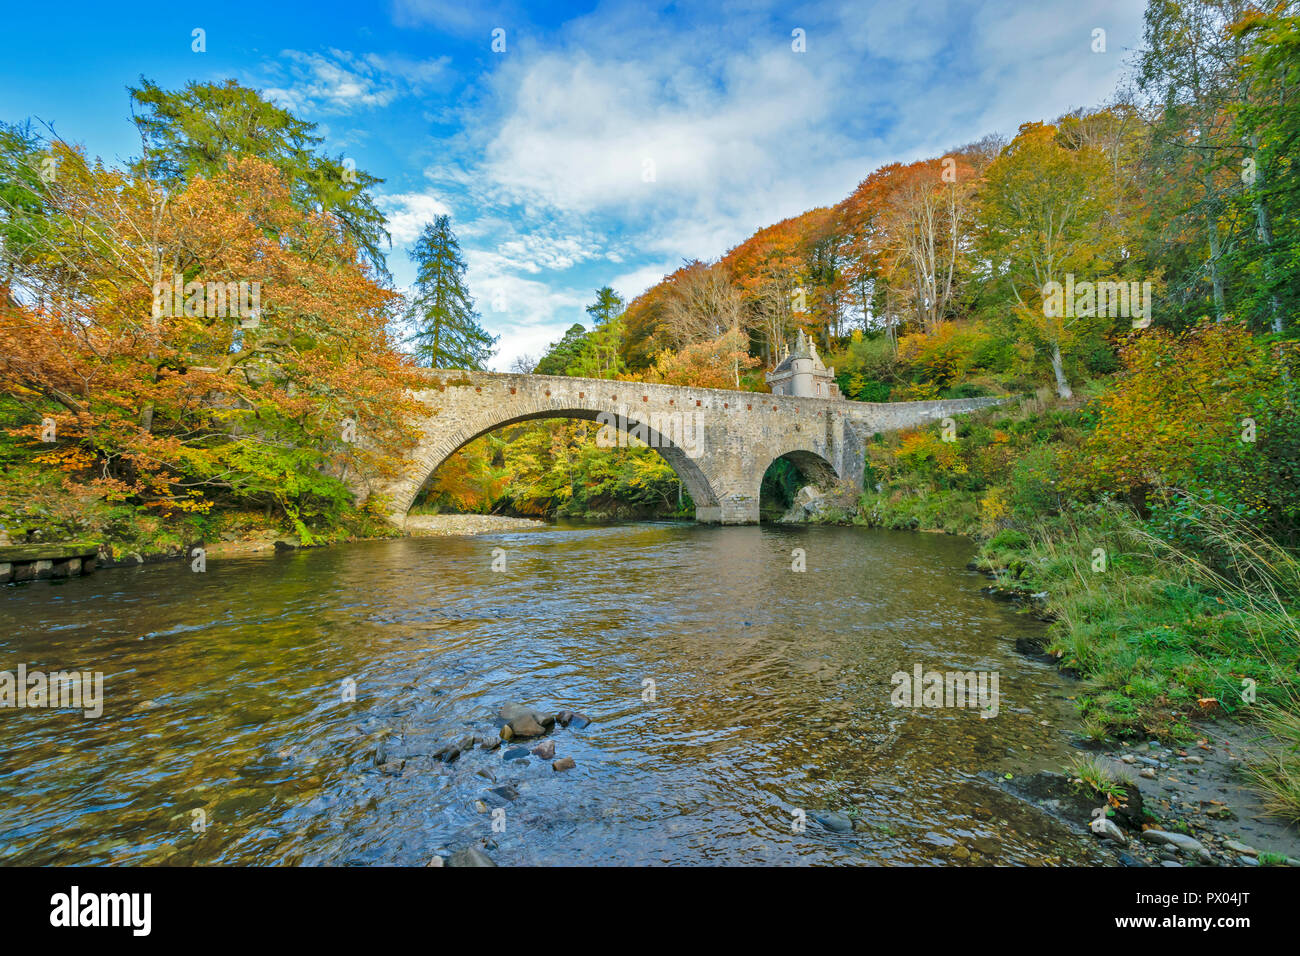 OLD BRIDGE OF AVON BALLINDALLOCH CASTLE GRAMPIAN SCOTLAND THE BRIDGE AND BARONIAL GATEHOUSE AND REFLECTED AUTUMNAL COLOURS IN THE RIVER Stock Photo